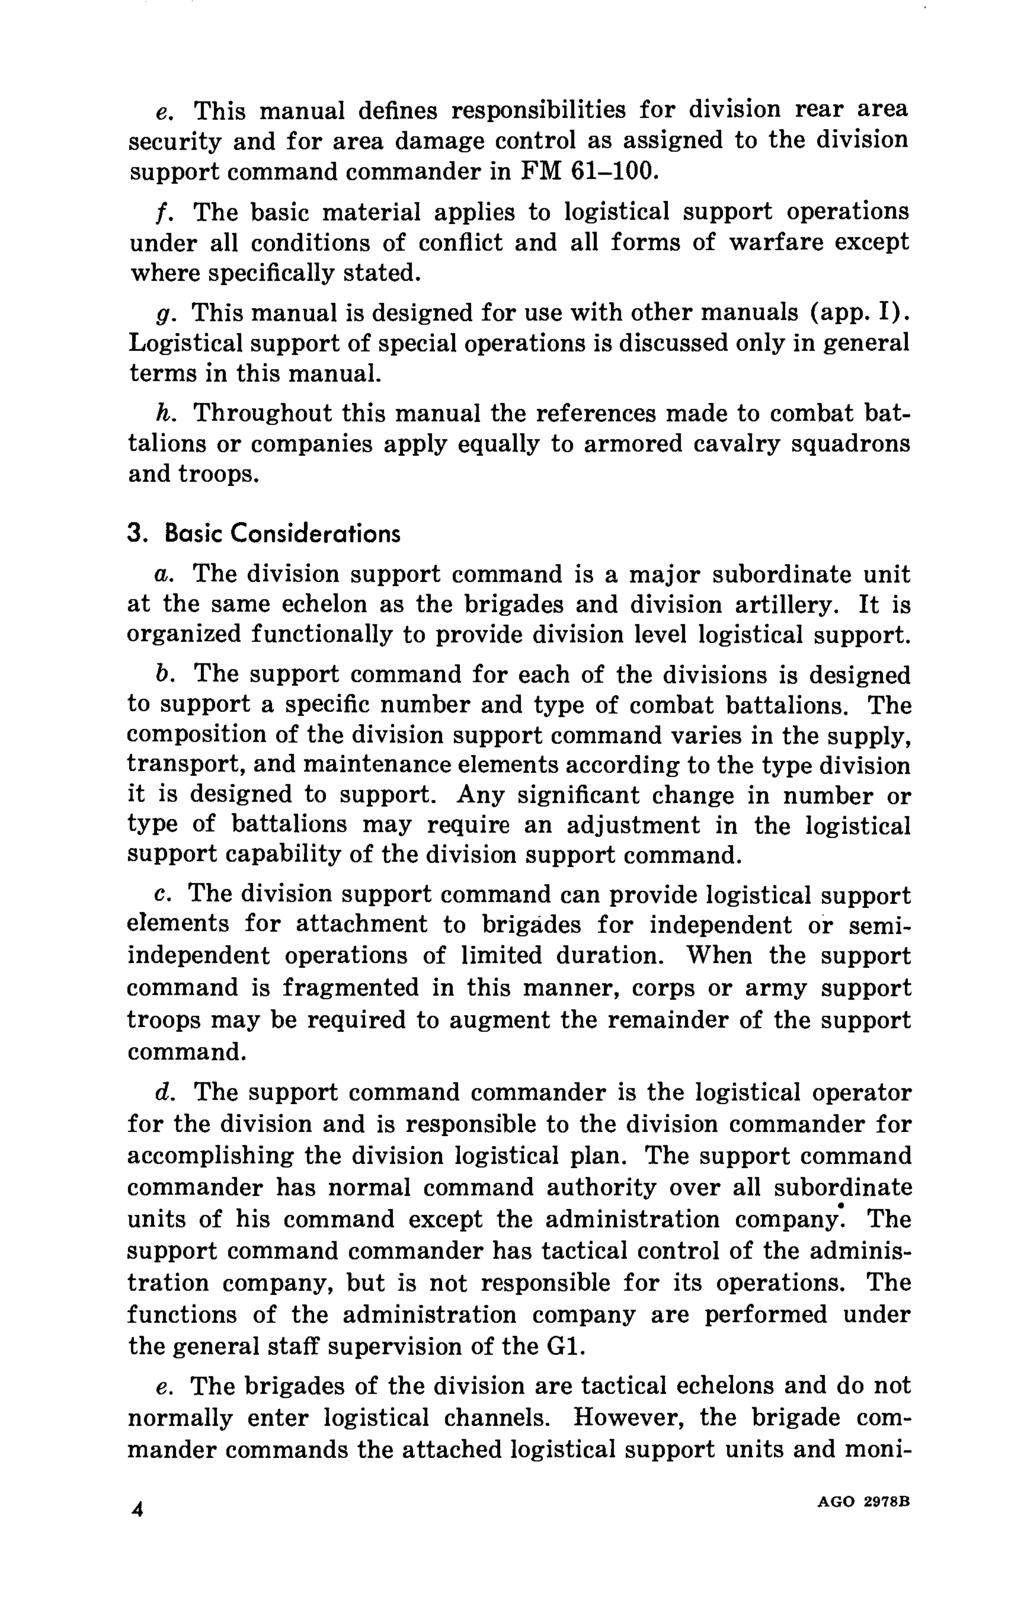 e. This manual defines responsibilities for division rear area security and for area damage control as assigned to the division support command commander in FM 61-100. f. The basic material applies to logistical support operations under all conditions of conflict and all forms of warfare except where specifically stated.